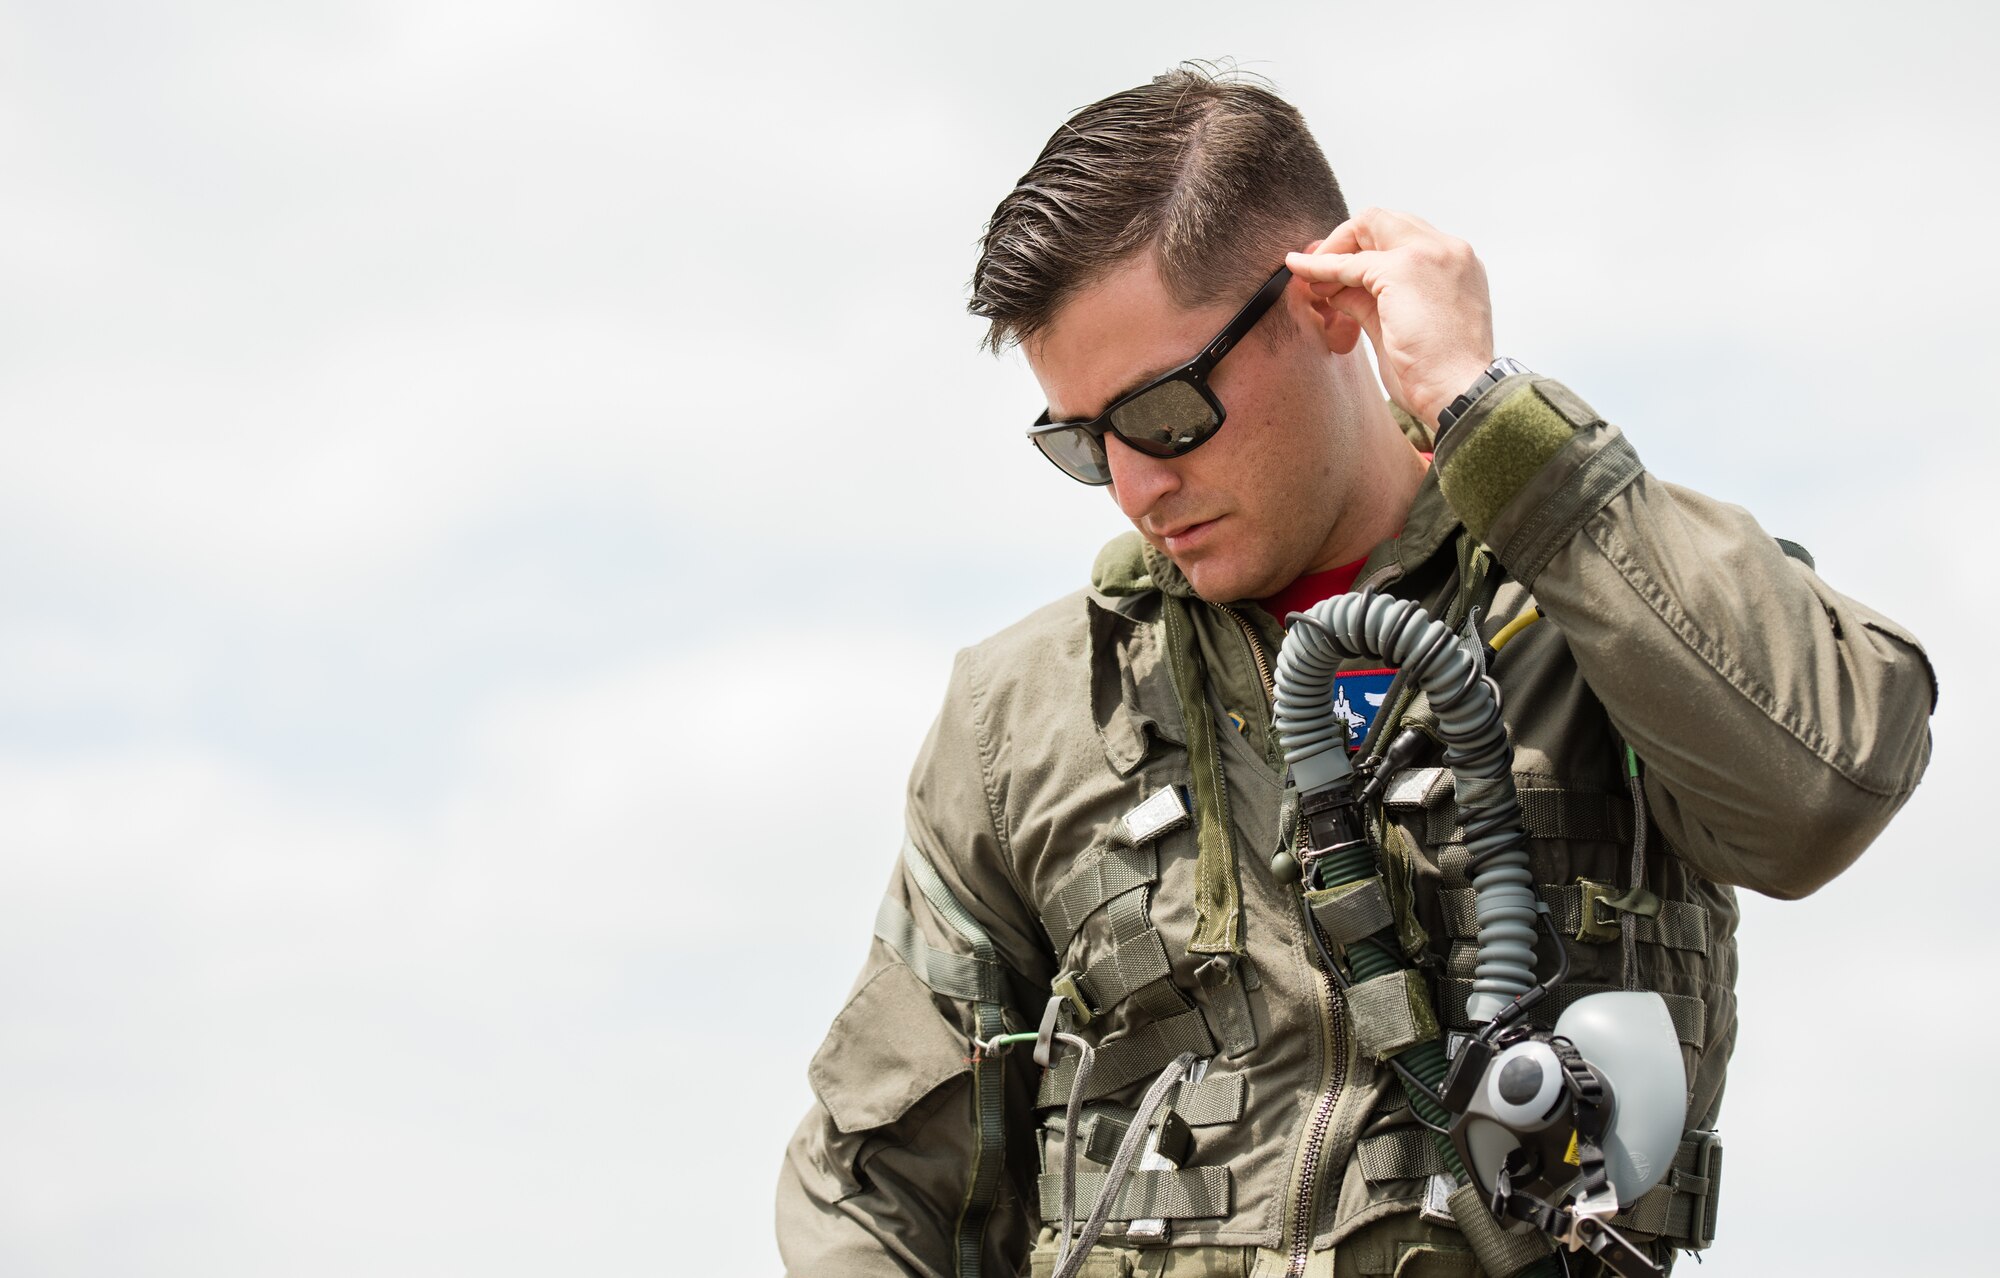 Capt. Andrew “Dojo” Olson, F-35 Heritage Flight Team pilot, prepares his gear before flight during the Wings Over South Texas air show at Naval Air Station Kingsville, Texas, March 24, 2018. The F-35 HFT includes one pilot and 12 maintainers, a compilation of Active Duty, Reserve, and Guard Airmen. (U.S. Air Force photo by Airman 1st Class Alexander Cook)